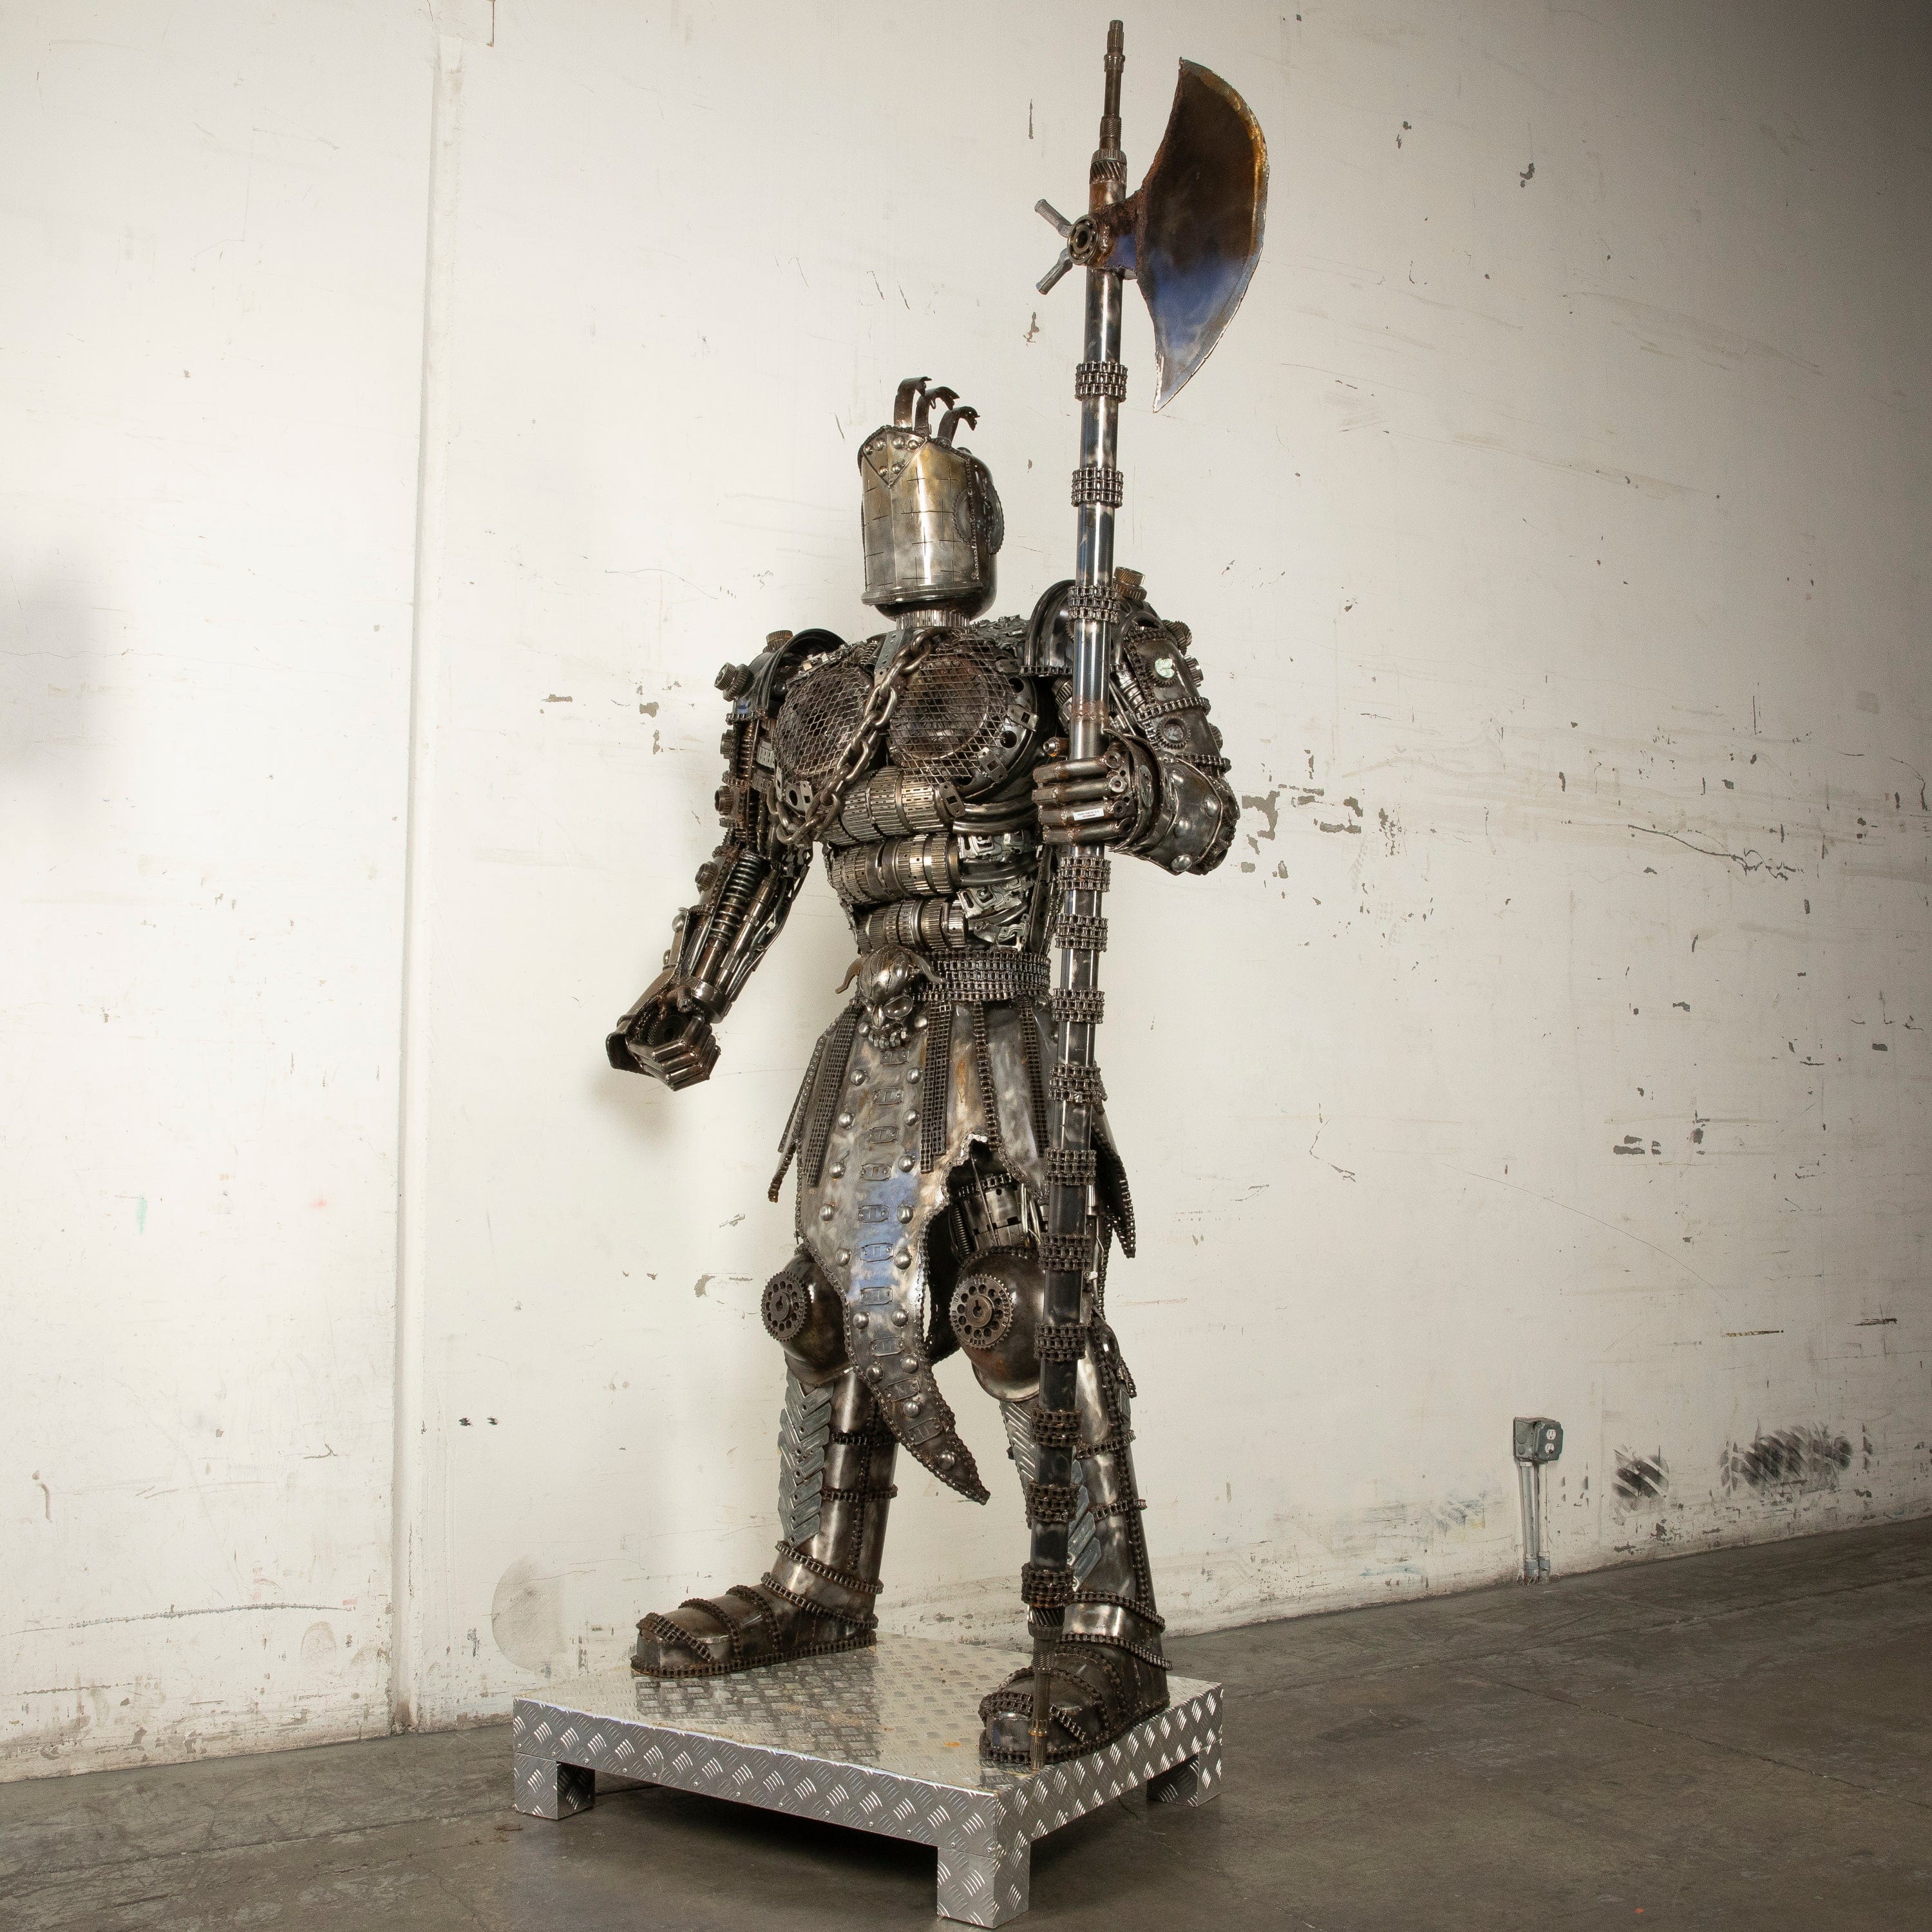 Kalifano Recycled Metal Art 91" Knight Recycled Metal Art Sculpture RMS-KN230-S16